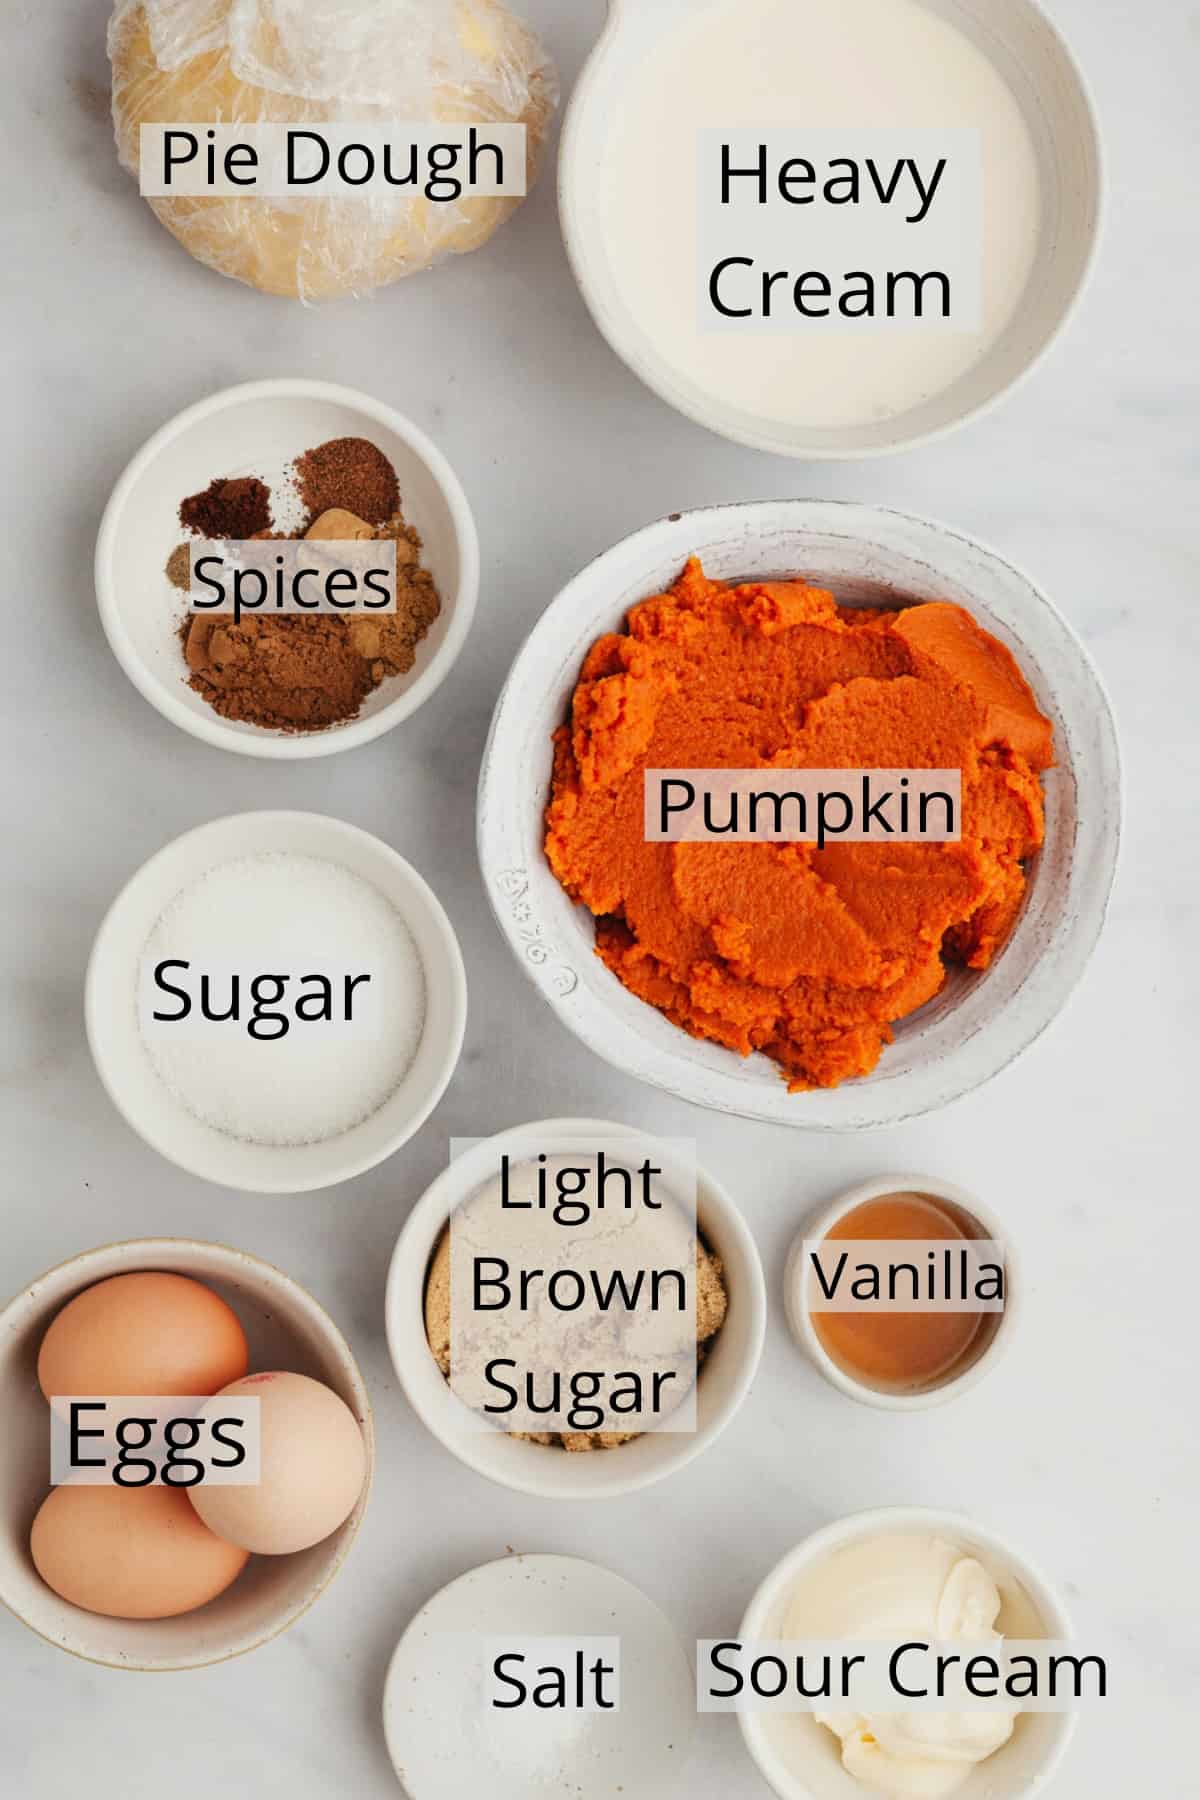 All the ingredients needed to make a pumpkin pie, weighed out into small bowls.